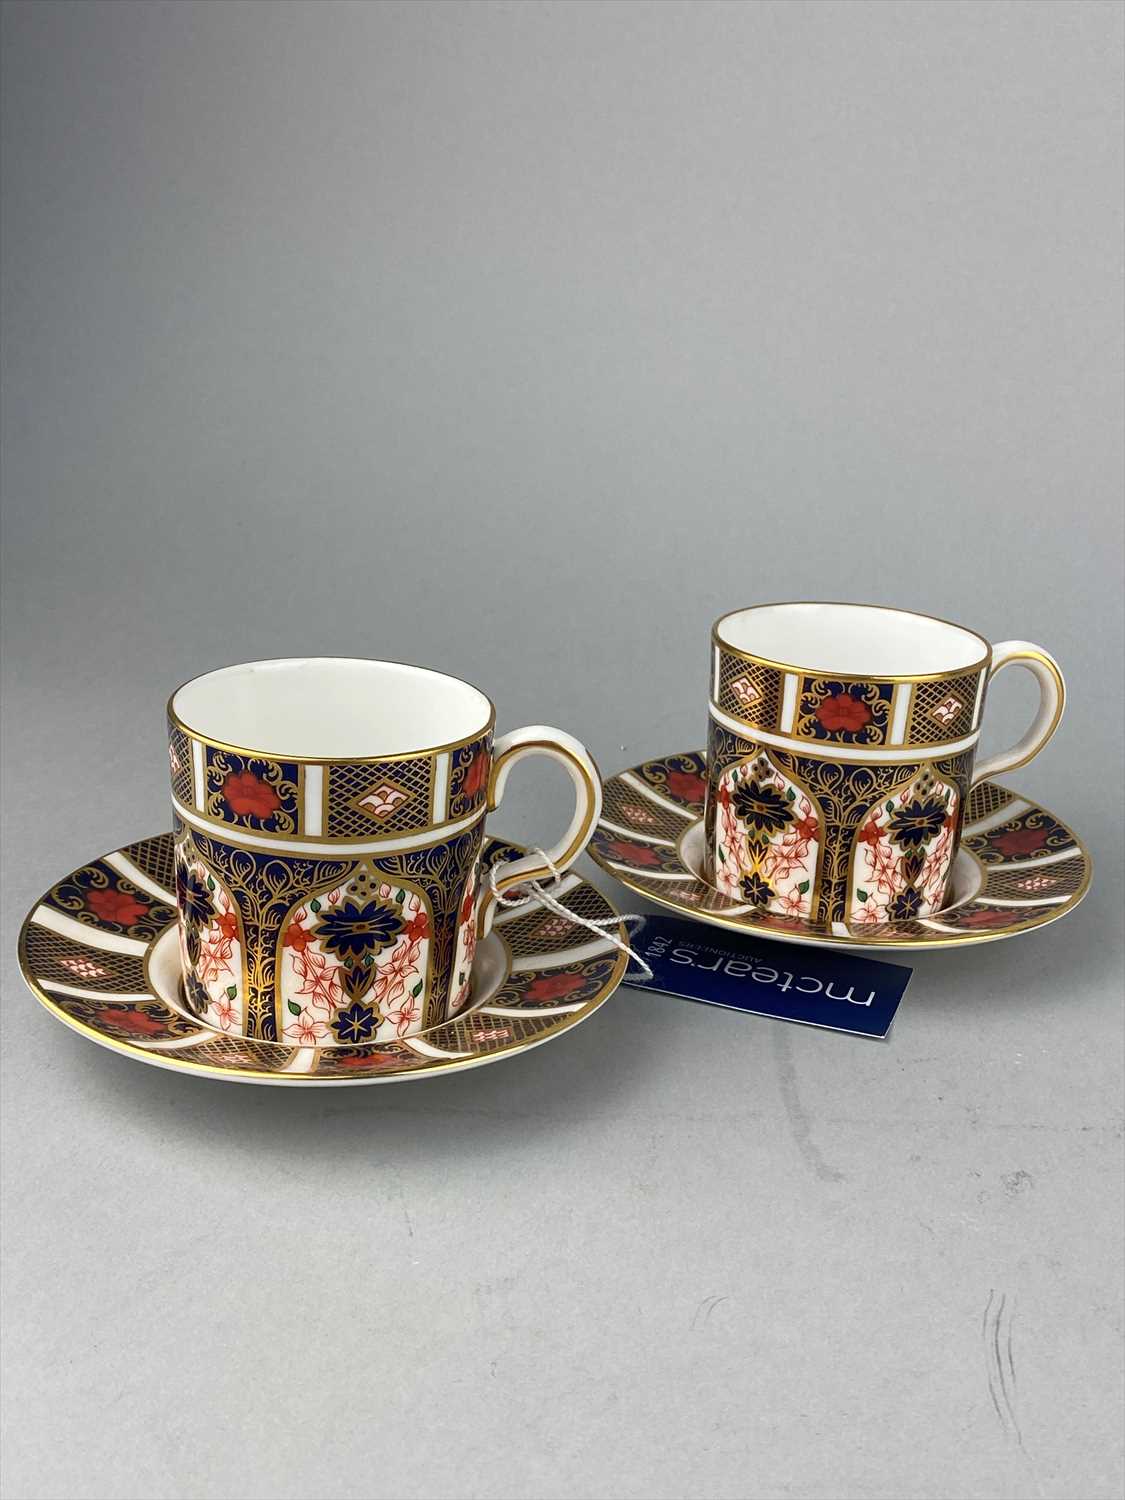 Lot 125 - A PAIR OF ROYAL CROWN DERBY IMARI PATTERN COFFEE CUPS AND SAUCERS